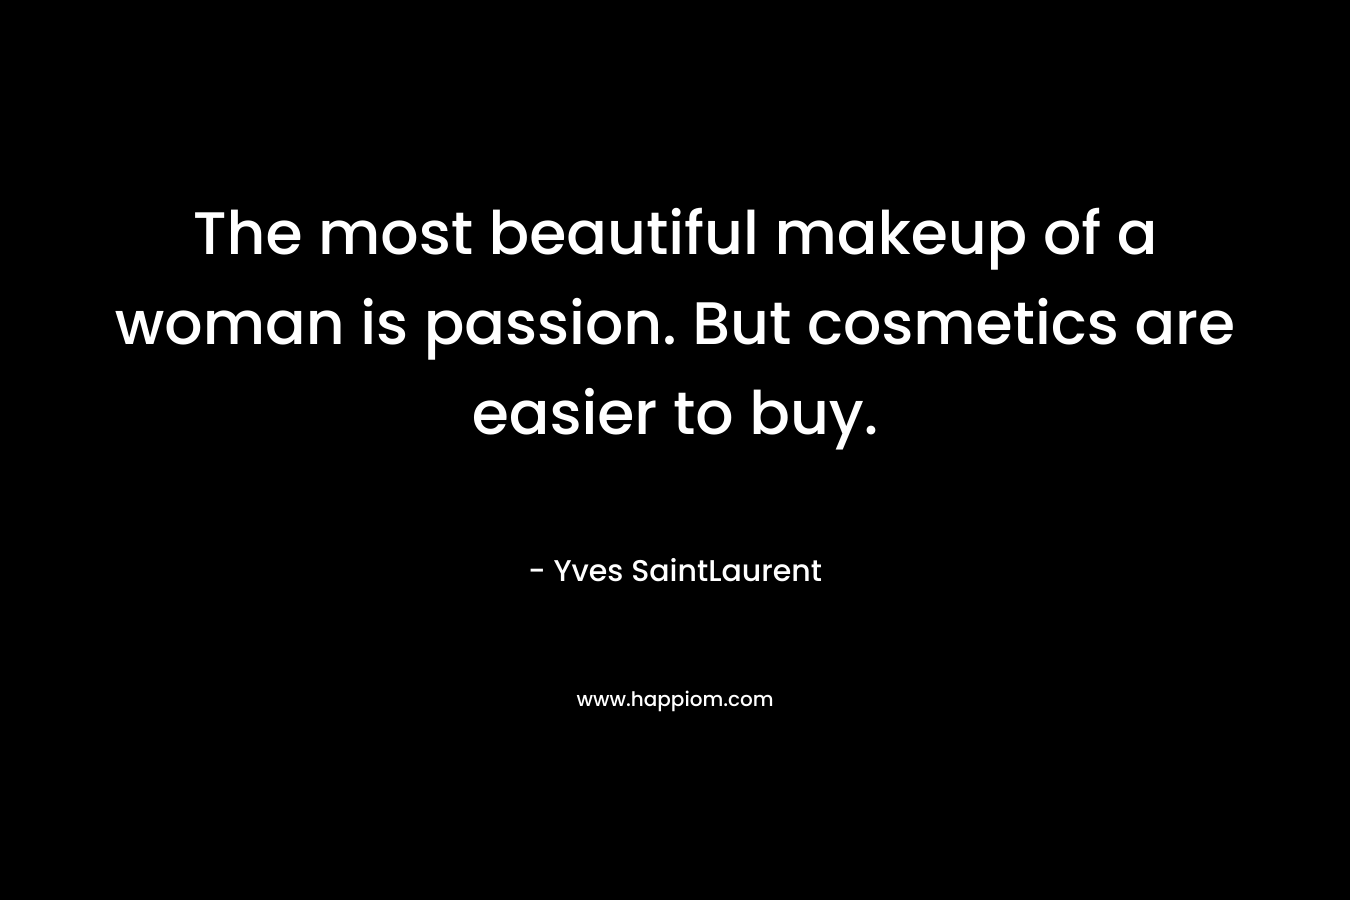 The most beautiful makeup of a woman is passion. But cosmetics are easier to buy. – Yves SaintLaurent